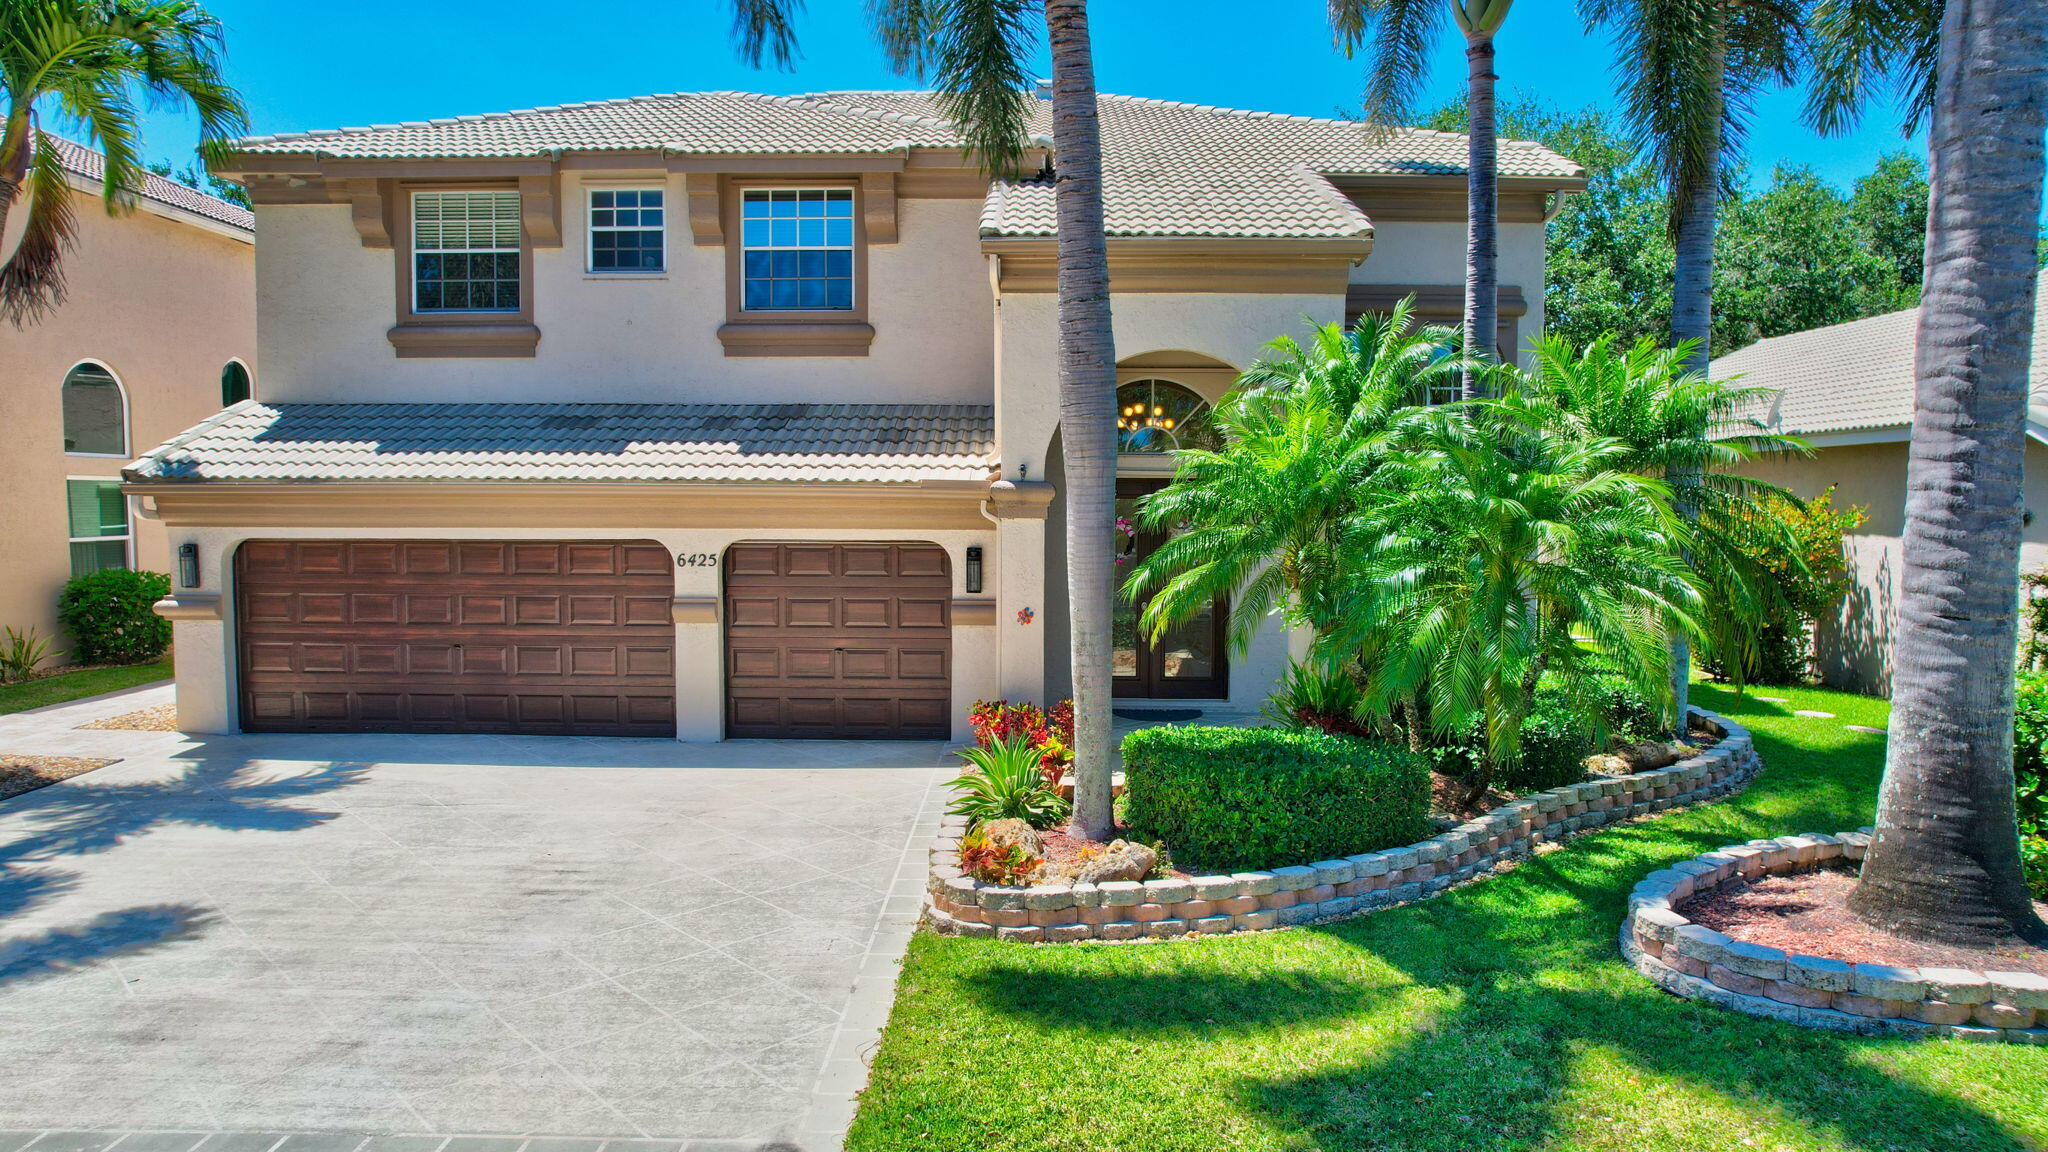 Property for Sale at 6425 Stonehurst Circle, Lake Worth, Palm Beach County, Florida - Bedrooms: 5 
Bathrooms: 3  - $887,900